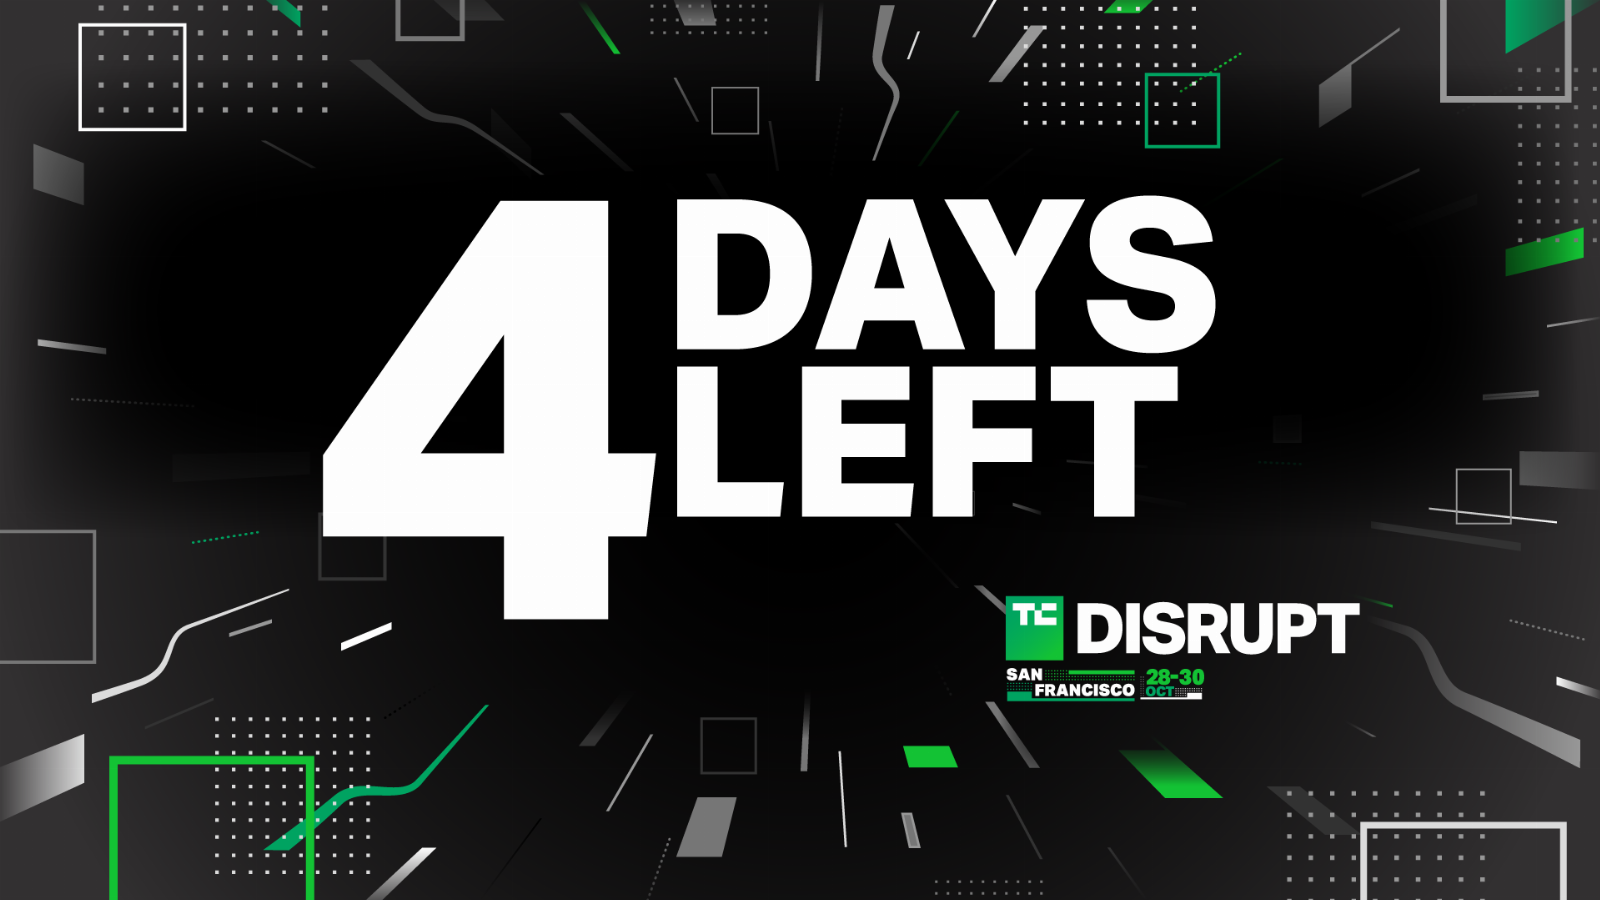 Chirp alert! 4 days left to save $1,000 on Disrupt super early-bird tickets